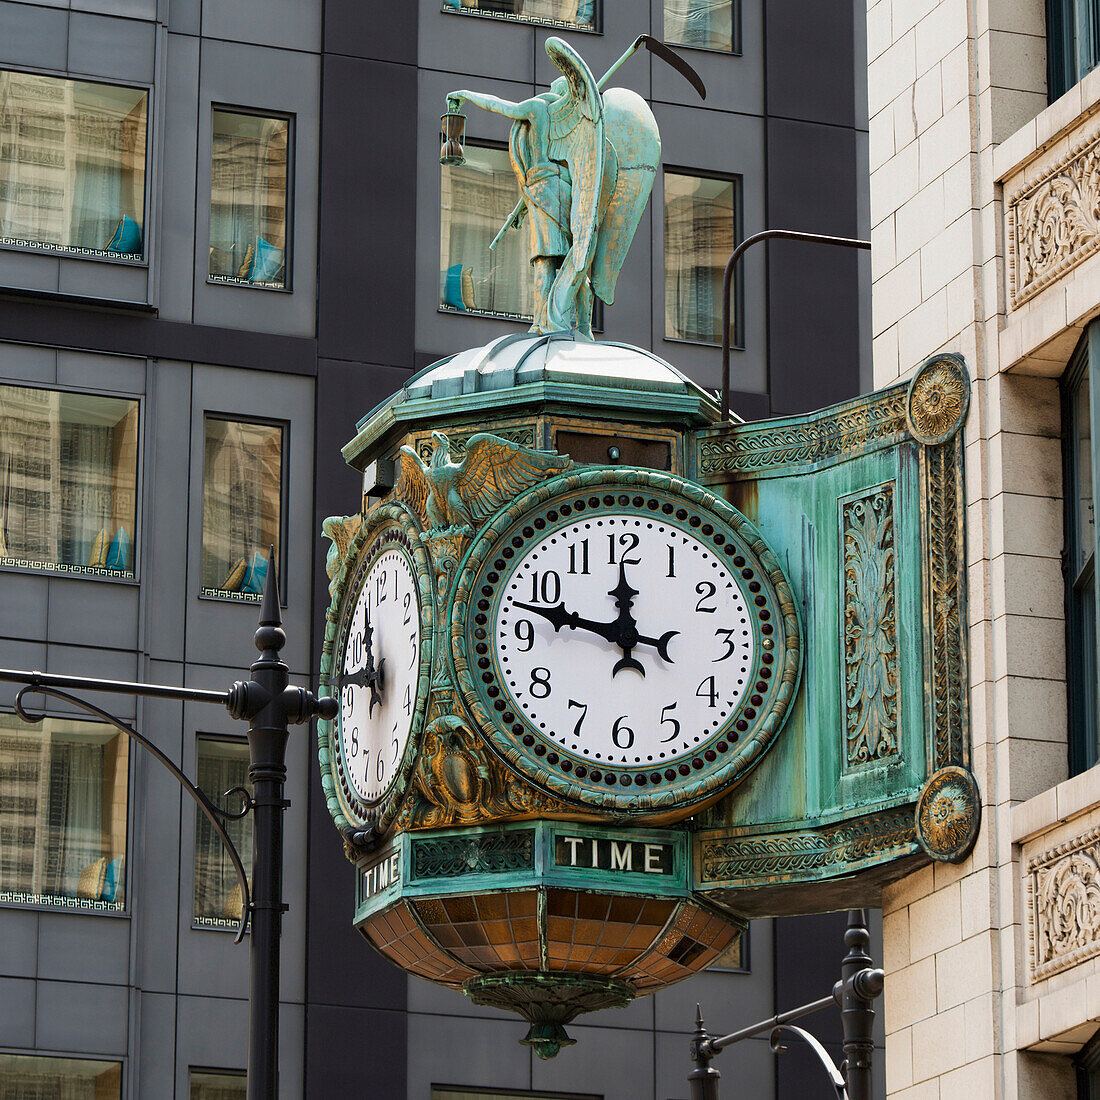 'Clock mounted on the side of a building;Chicago illinois united states of america'